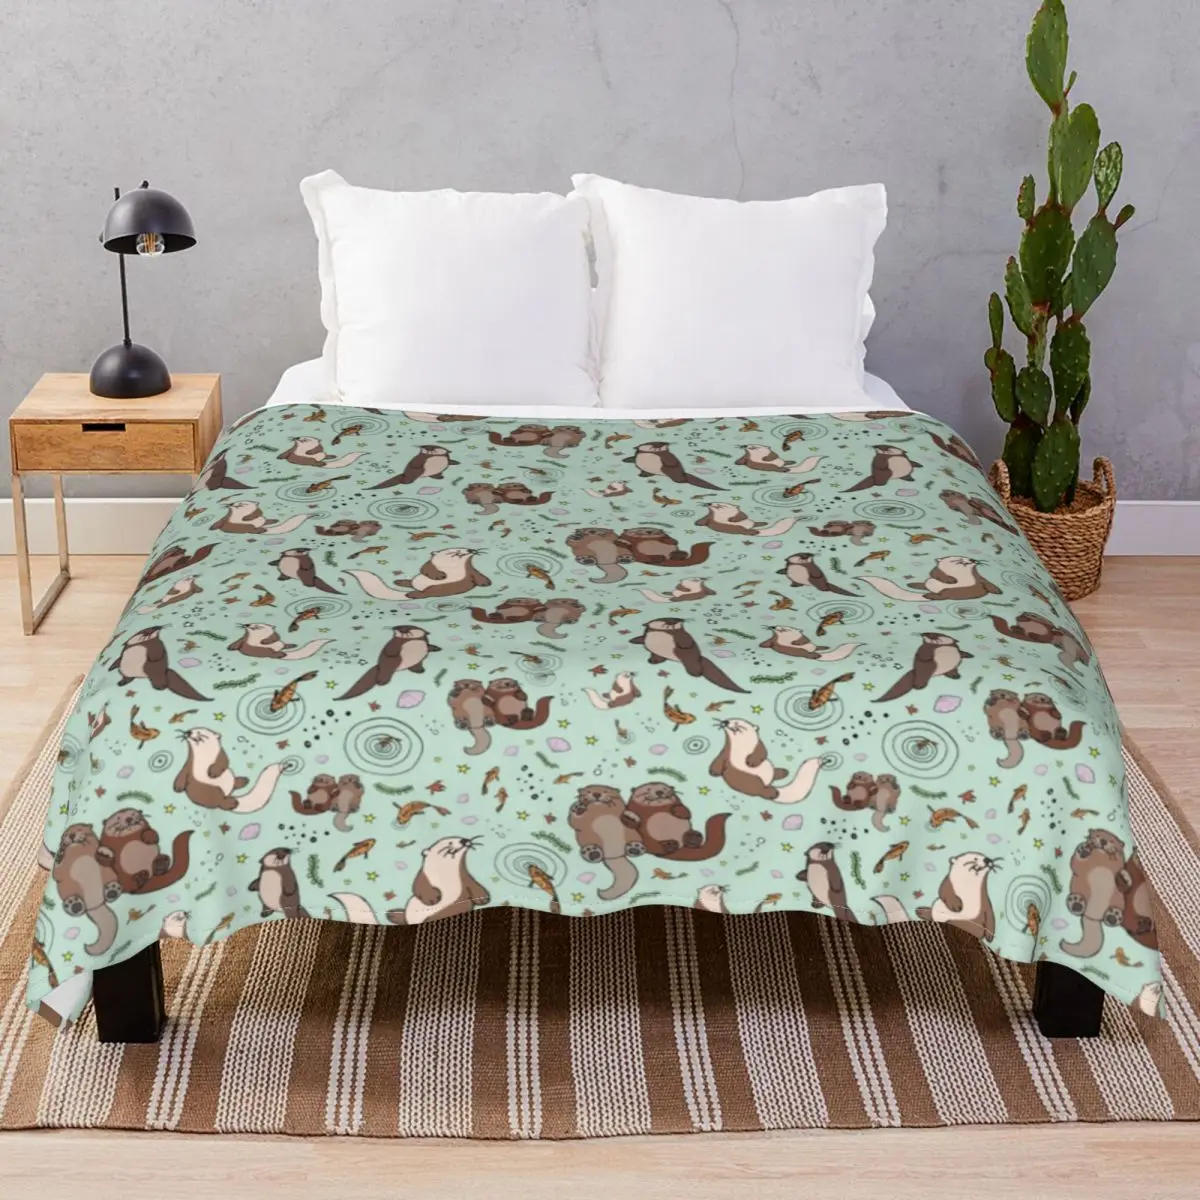 Otters In Blue Blankets Flannel Textile Decor Portable Throw Blanket for Bed Sofa Travel Cinema